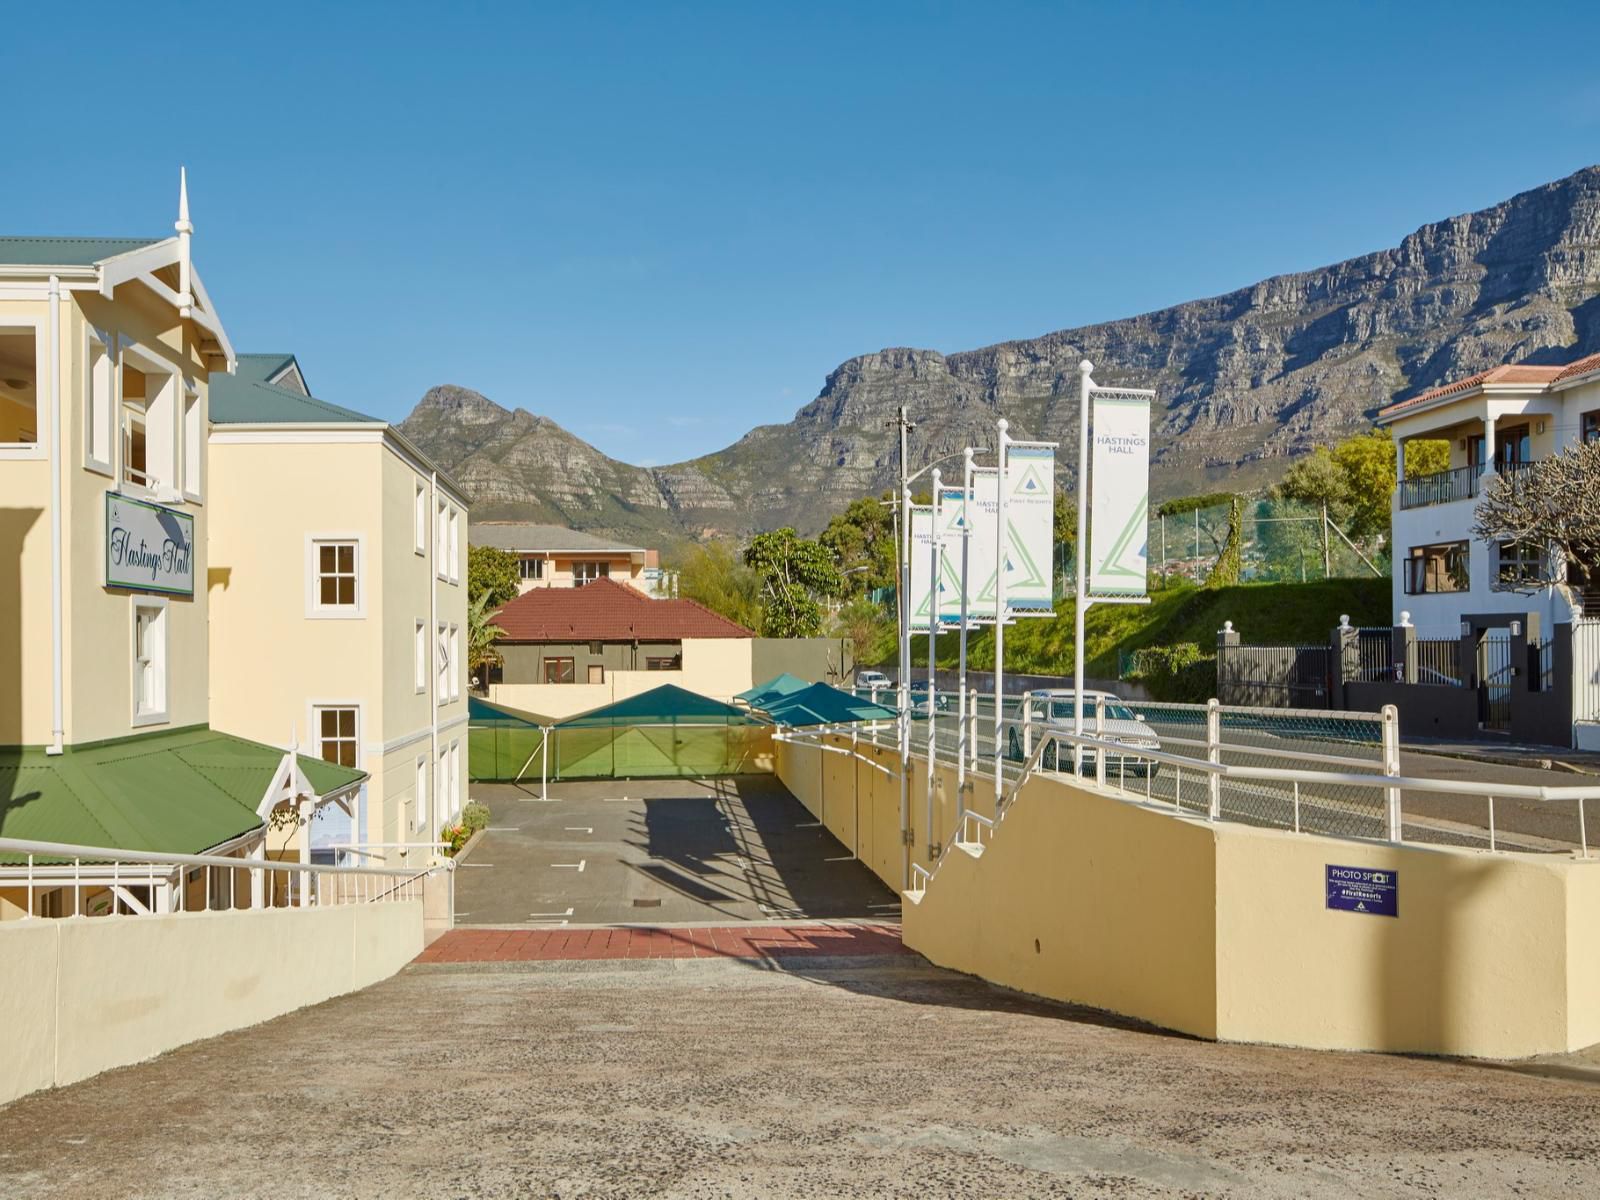 First Group Hastings Hall Tamboerskloof Cape Town Western Cape South Africa Complementary Colors, House, Building, Architecture, Mountain, Nature